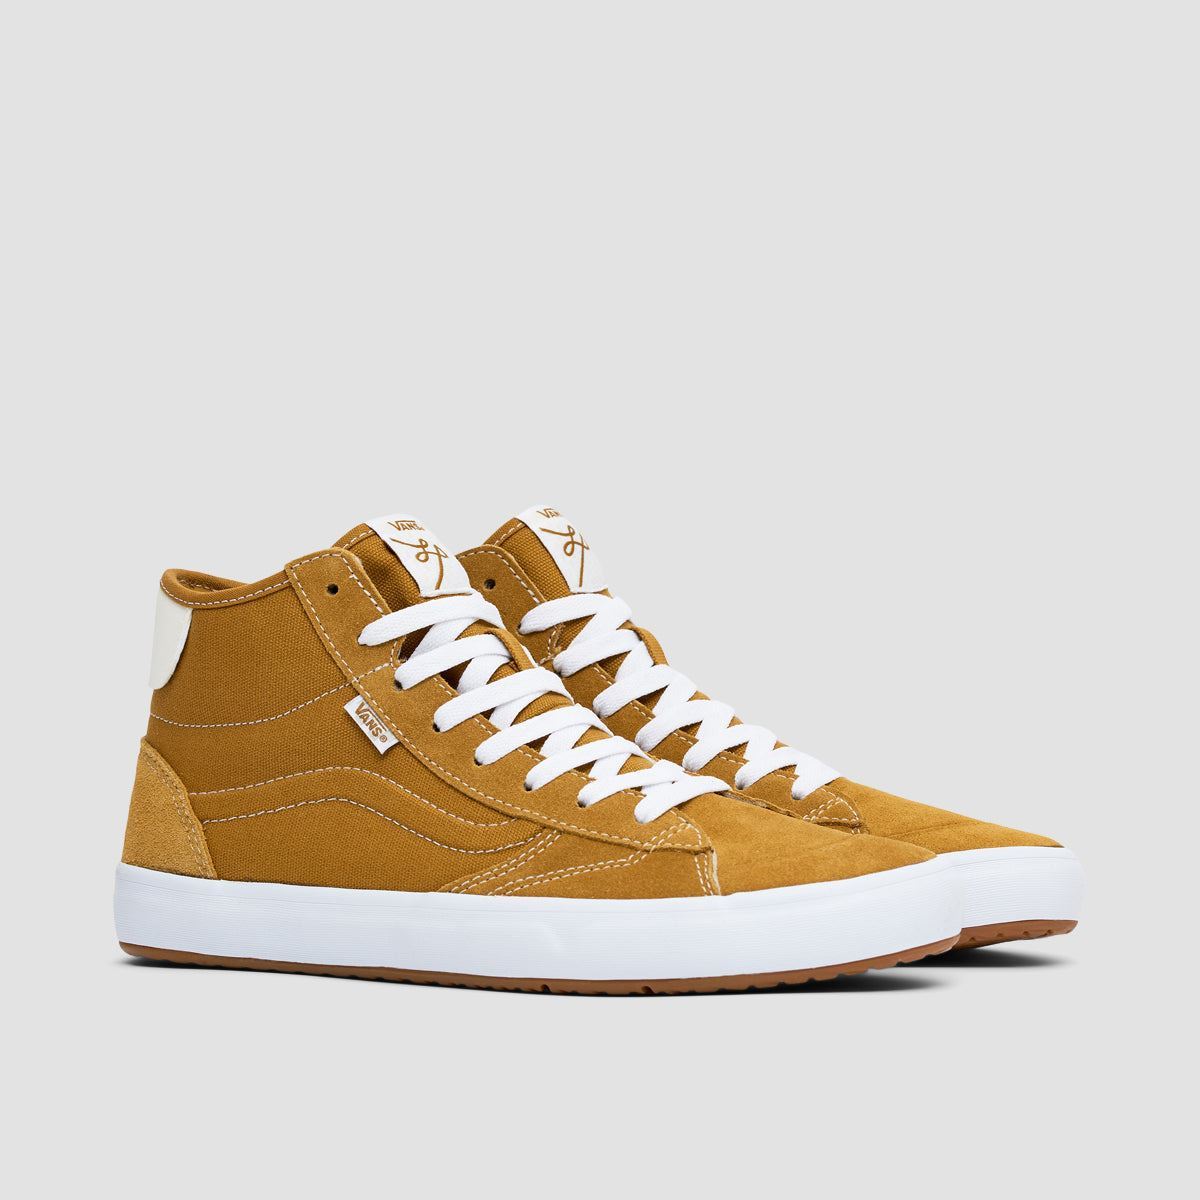 Vans The Lizzie High Top Shoes - Gold/White